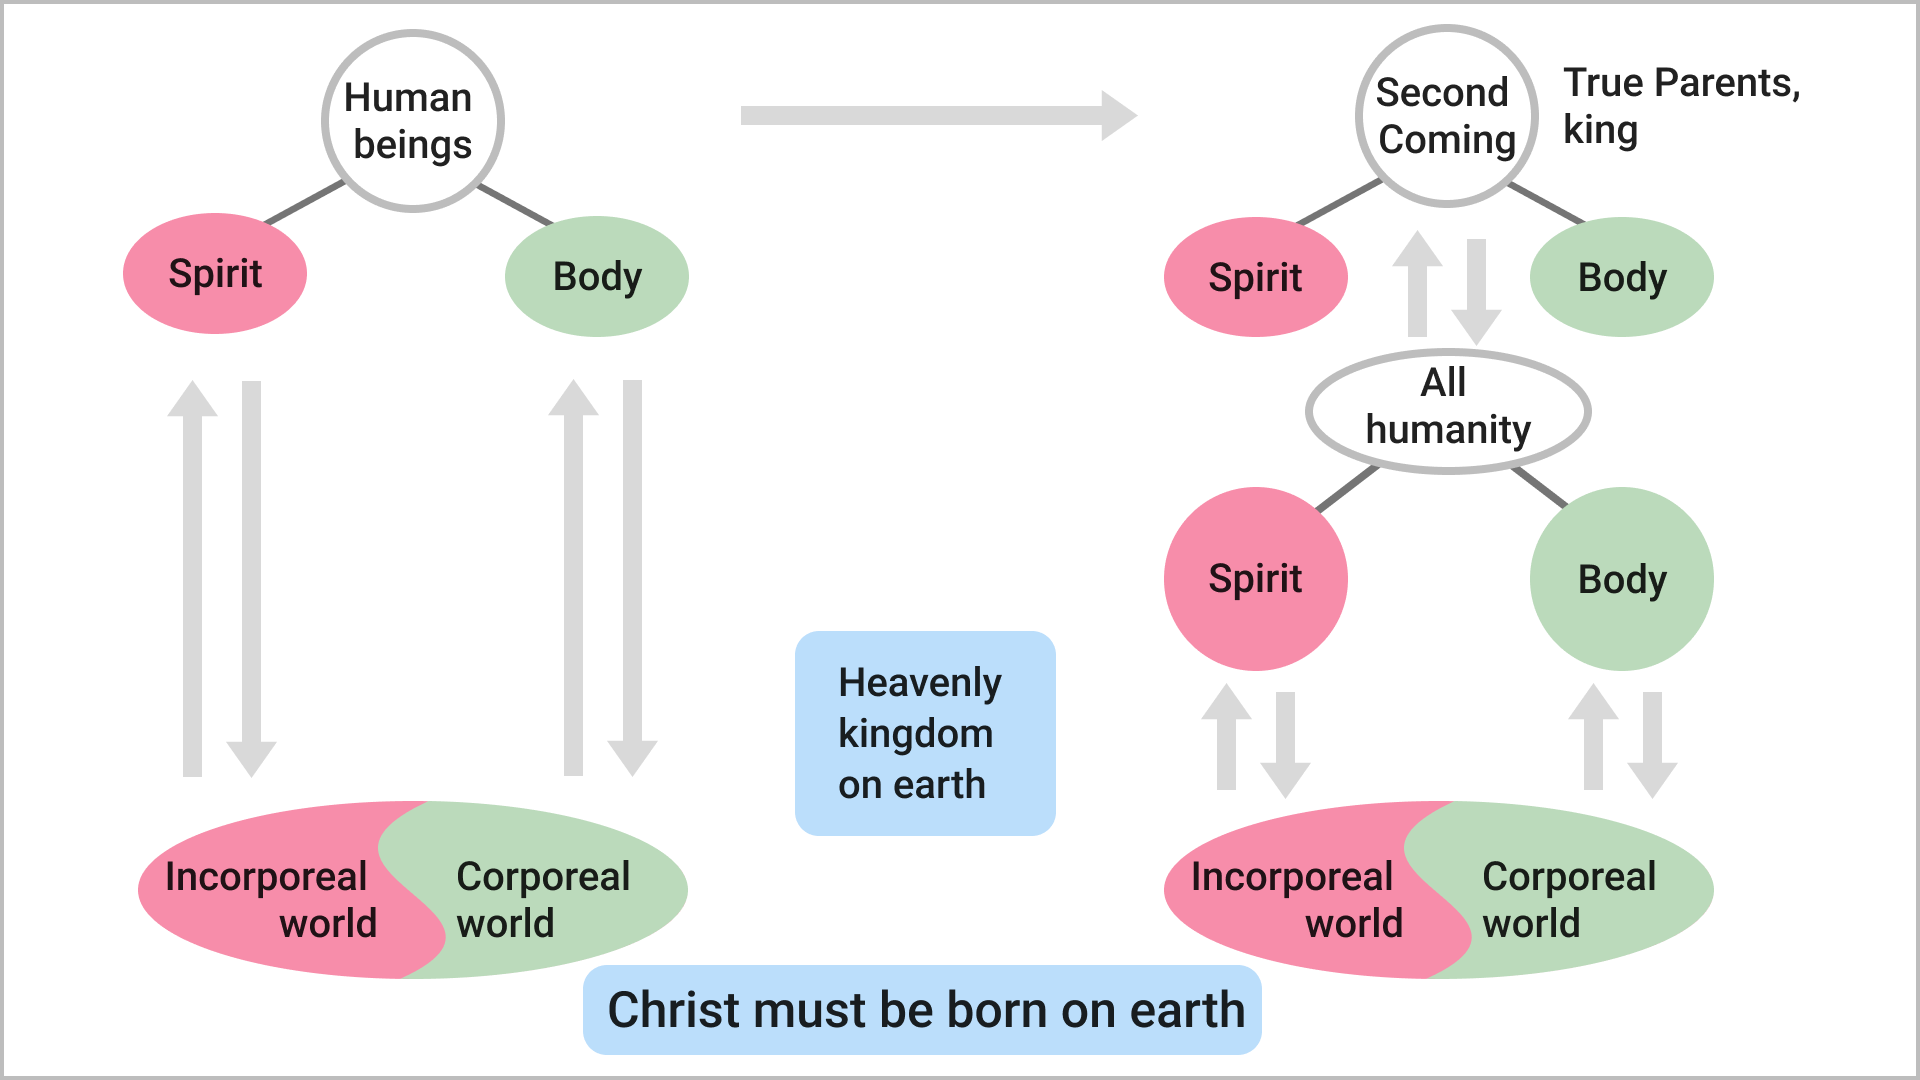 Christ must be born on earth